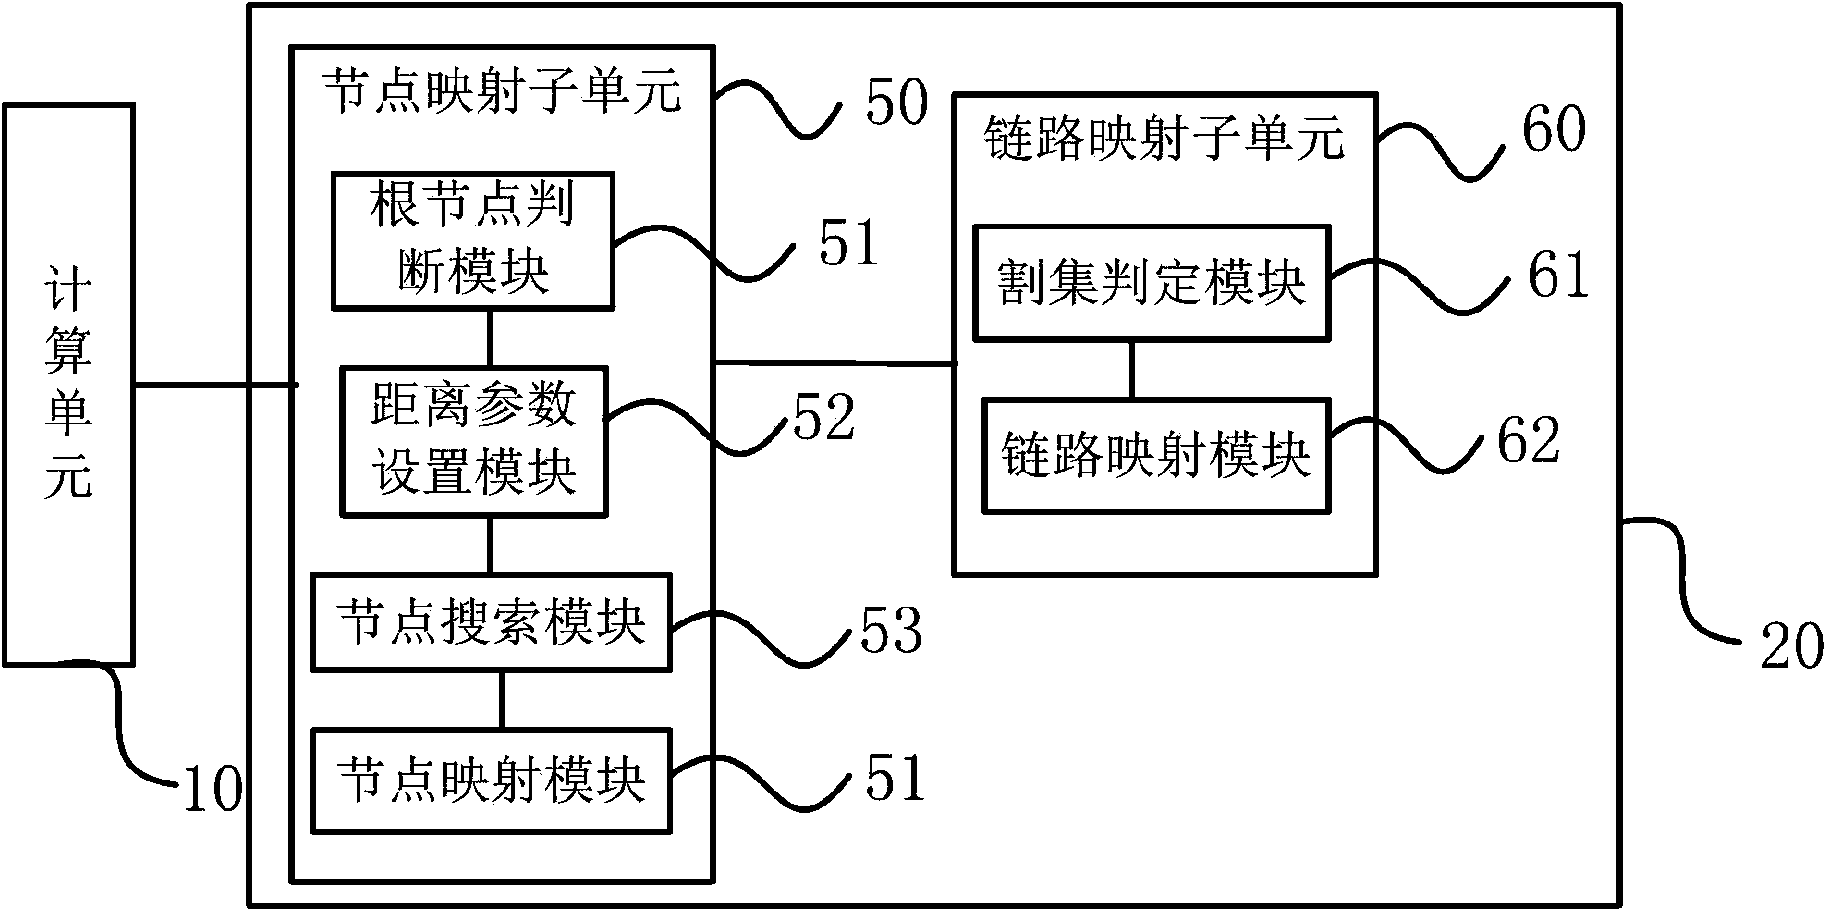 Virtual network mapping method and system based on cut set